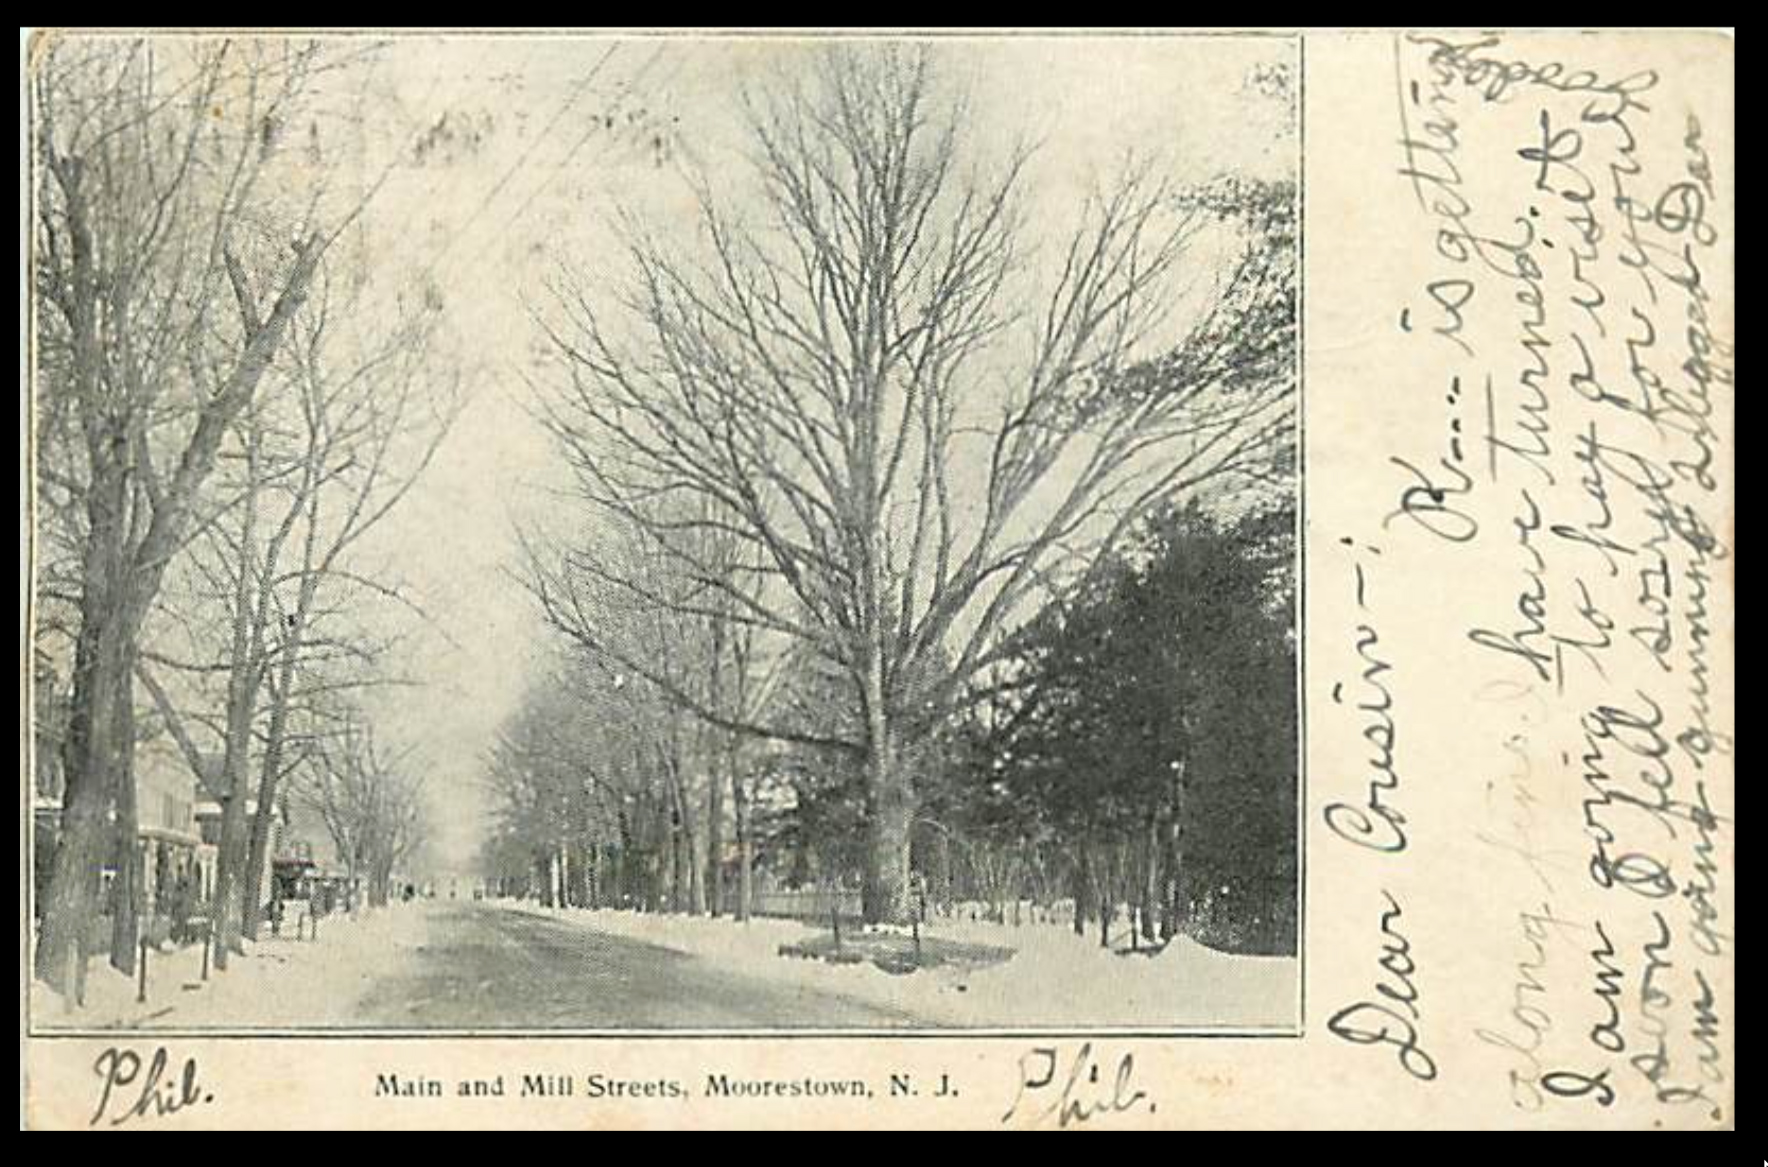 Moorestown - view at Main and Mill Streets - c 1910 | Moorestown | Old ...